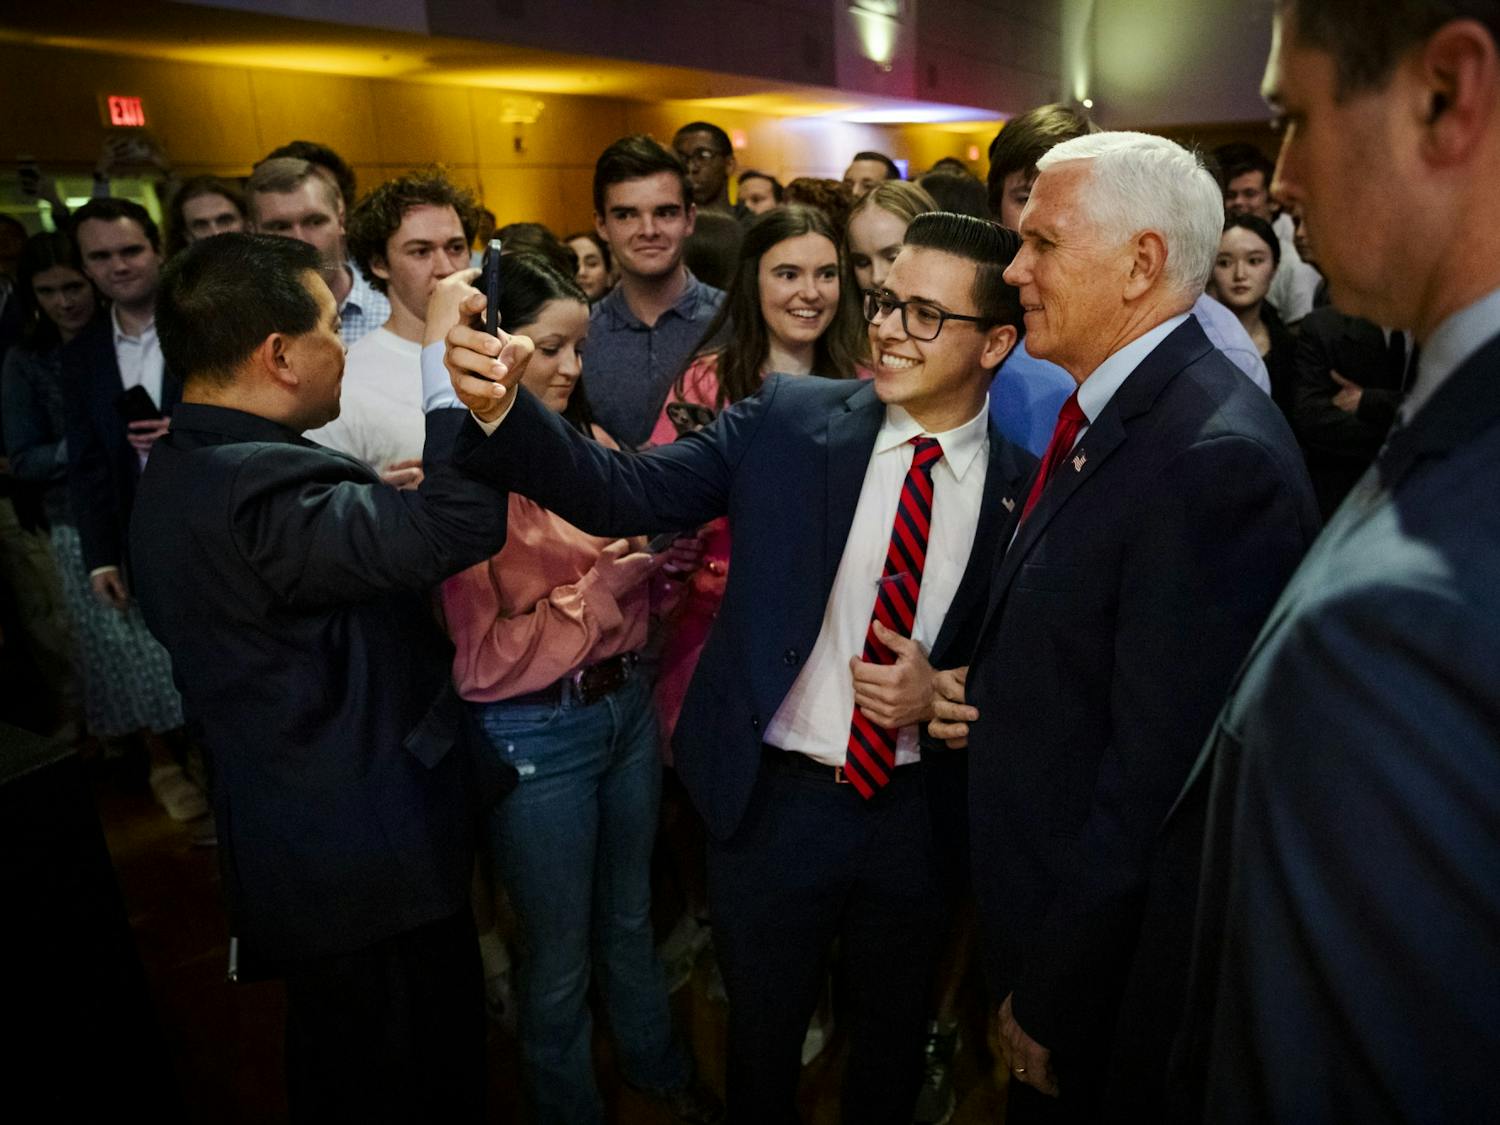 Students take selfies with Mike Pence, former vice president of the United States, after Pence delivered a speech on UNC's campus on Wednesday, April 26, 2023. Pence was hosted by the UNC College Republicans in an event called "Saving America from the Woke Left."